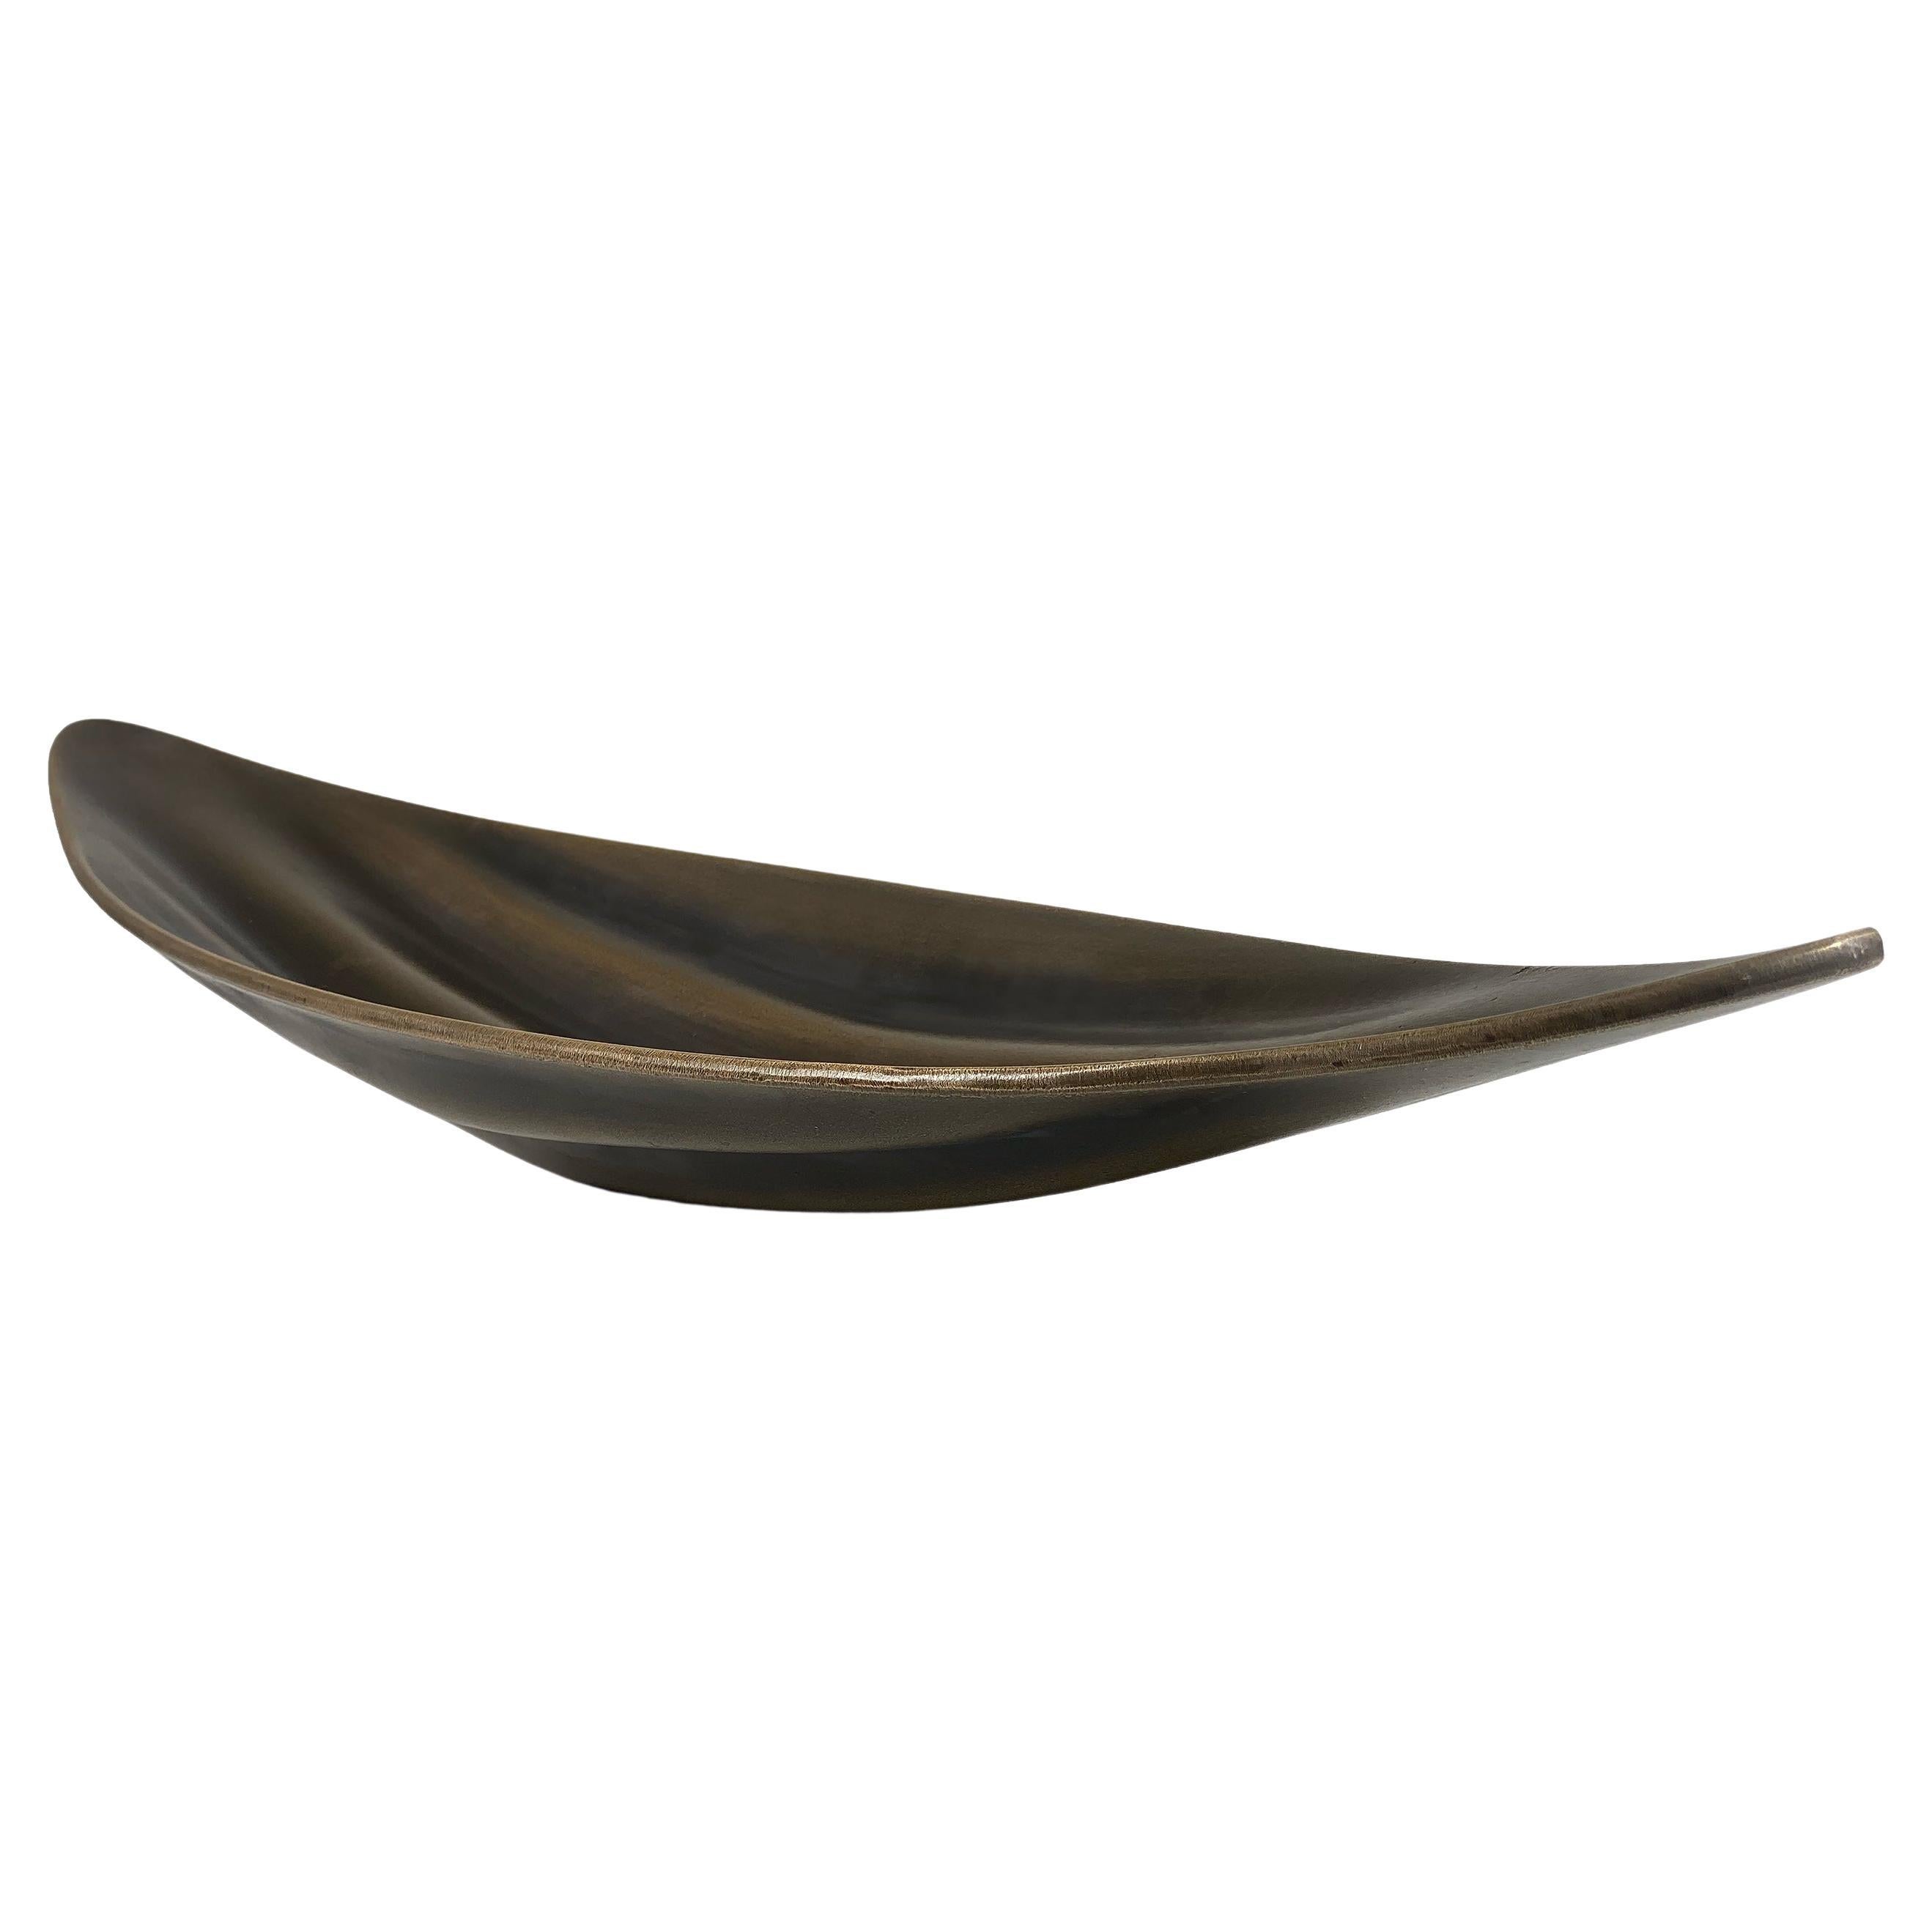 The Husk Display Plate represents both form and function, making it a stunning addition to any home. Crafted from solid bronze, this piece boasts a beautifully weighted design that exudes timeless elegance. With its unique and striking aesthetic,